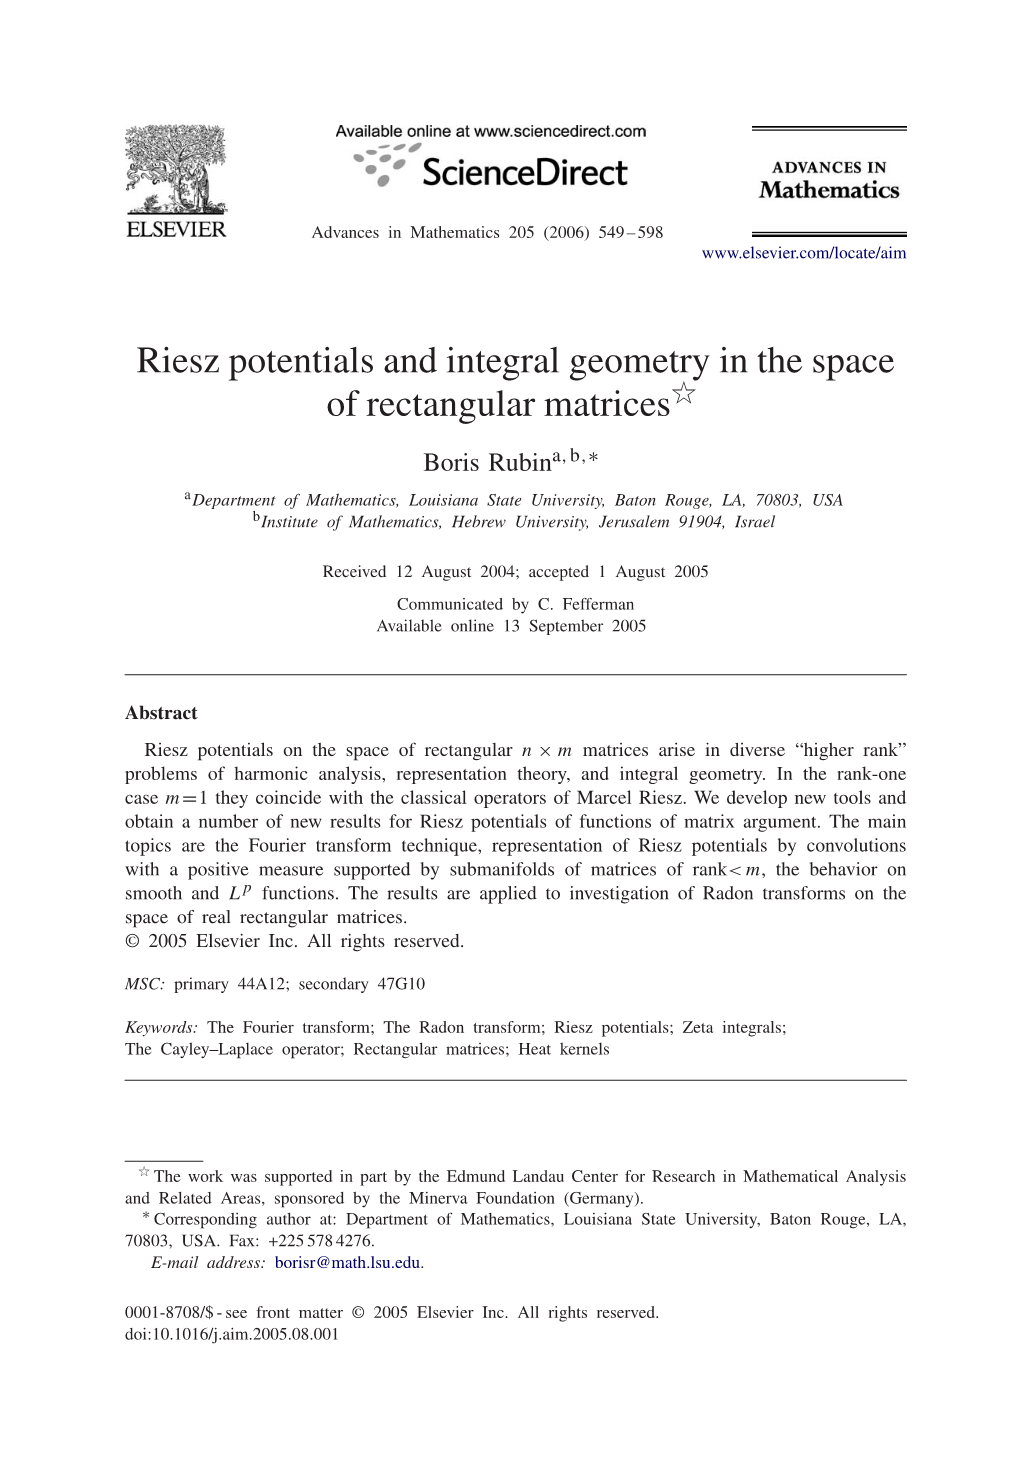 Riesz Potentials and Integral Geometry in the Space of Rectangular Matricesଁ